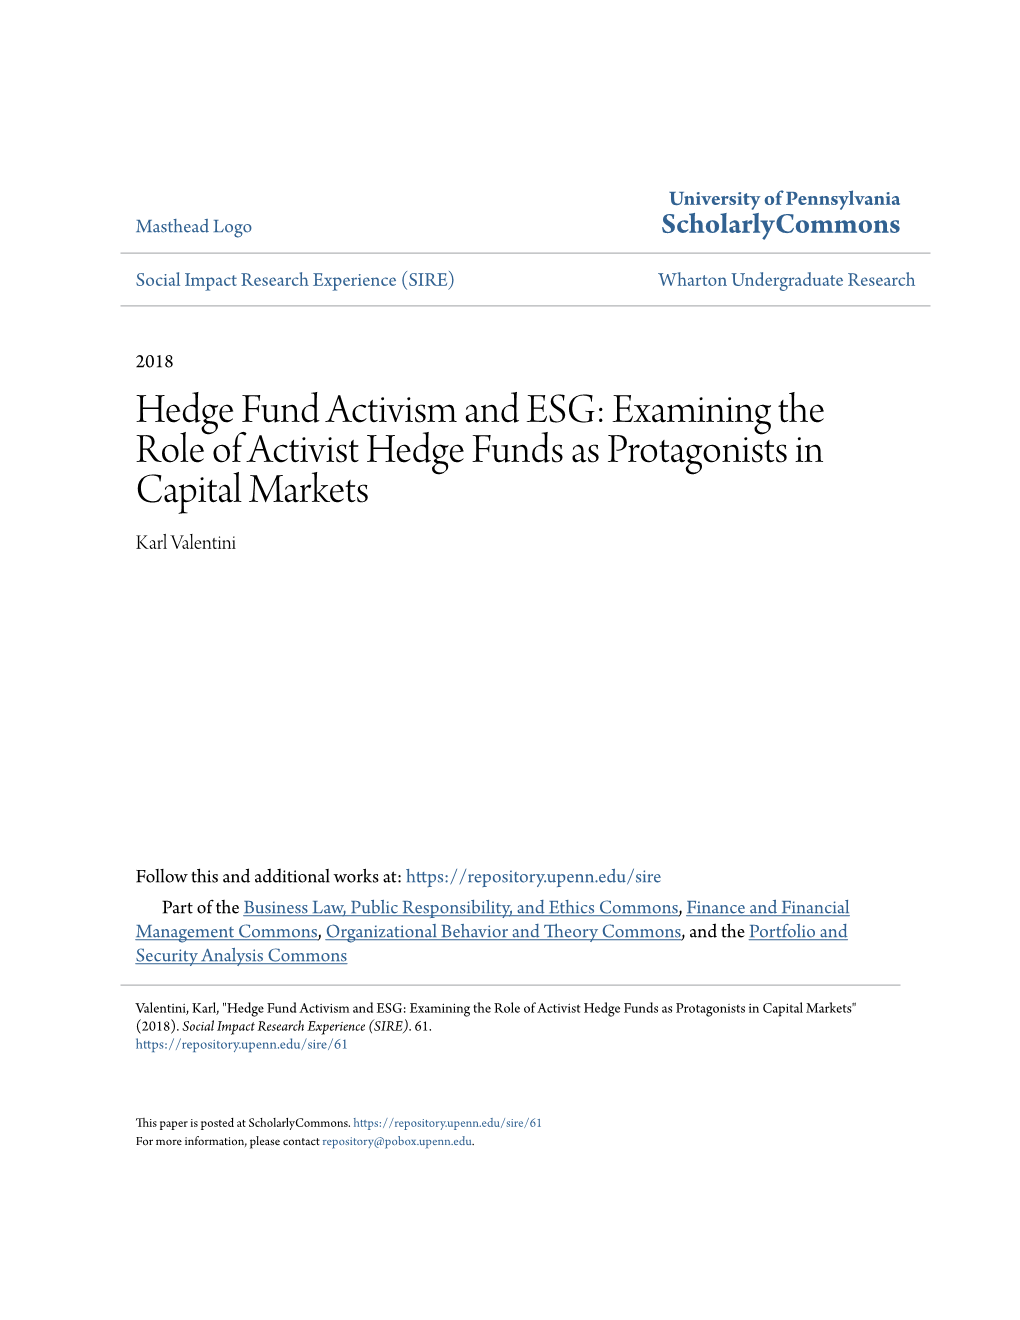 Hedge Fund Activism and ESG: Examining the Role of Activist Hedge Funds As Protagonists in Capital Markets Karl Valentini